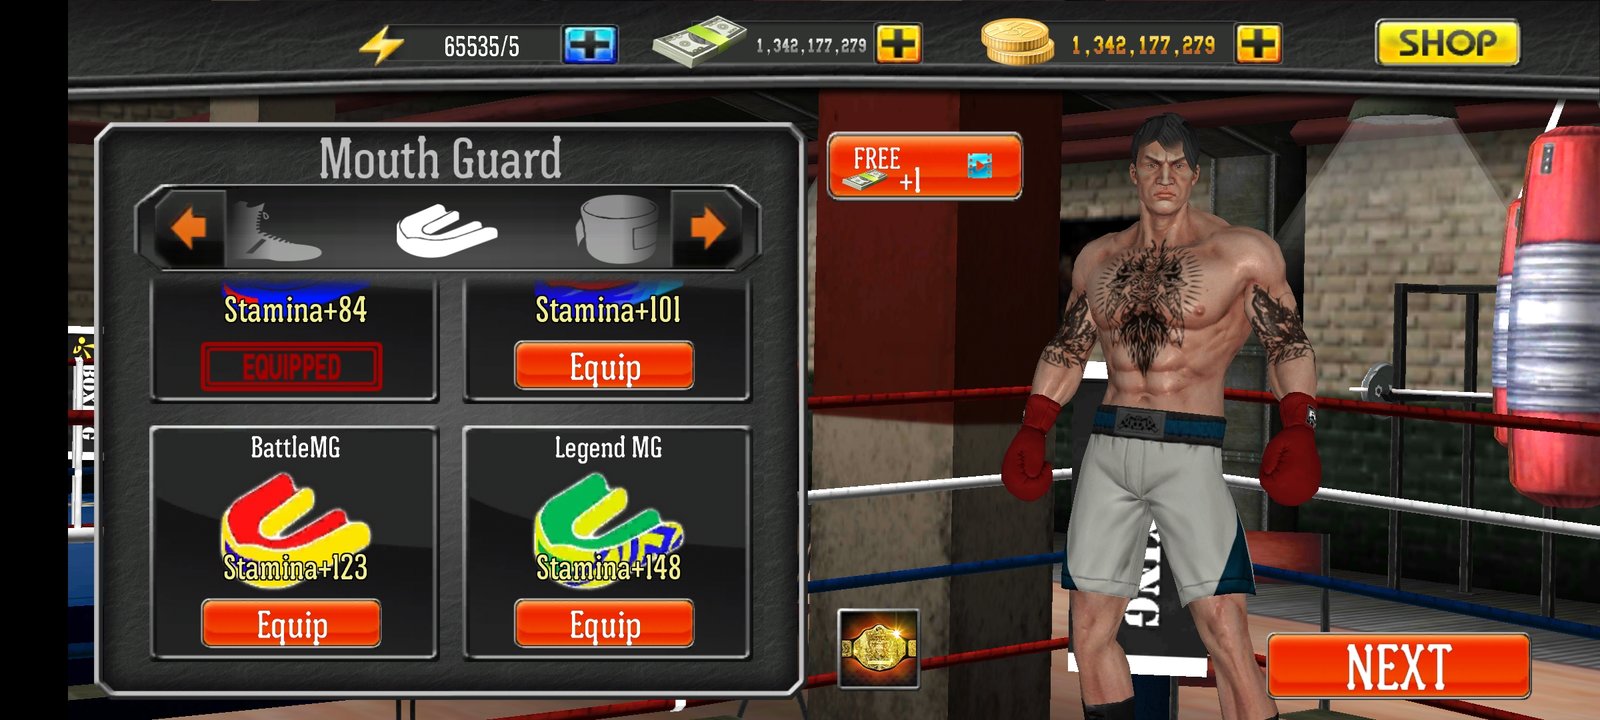 One Finger Death Punch v5.22 MOD APK, Auto Play